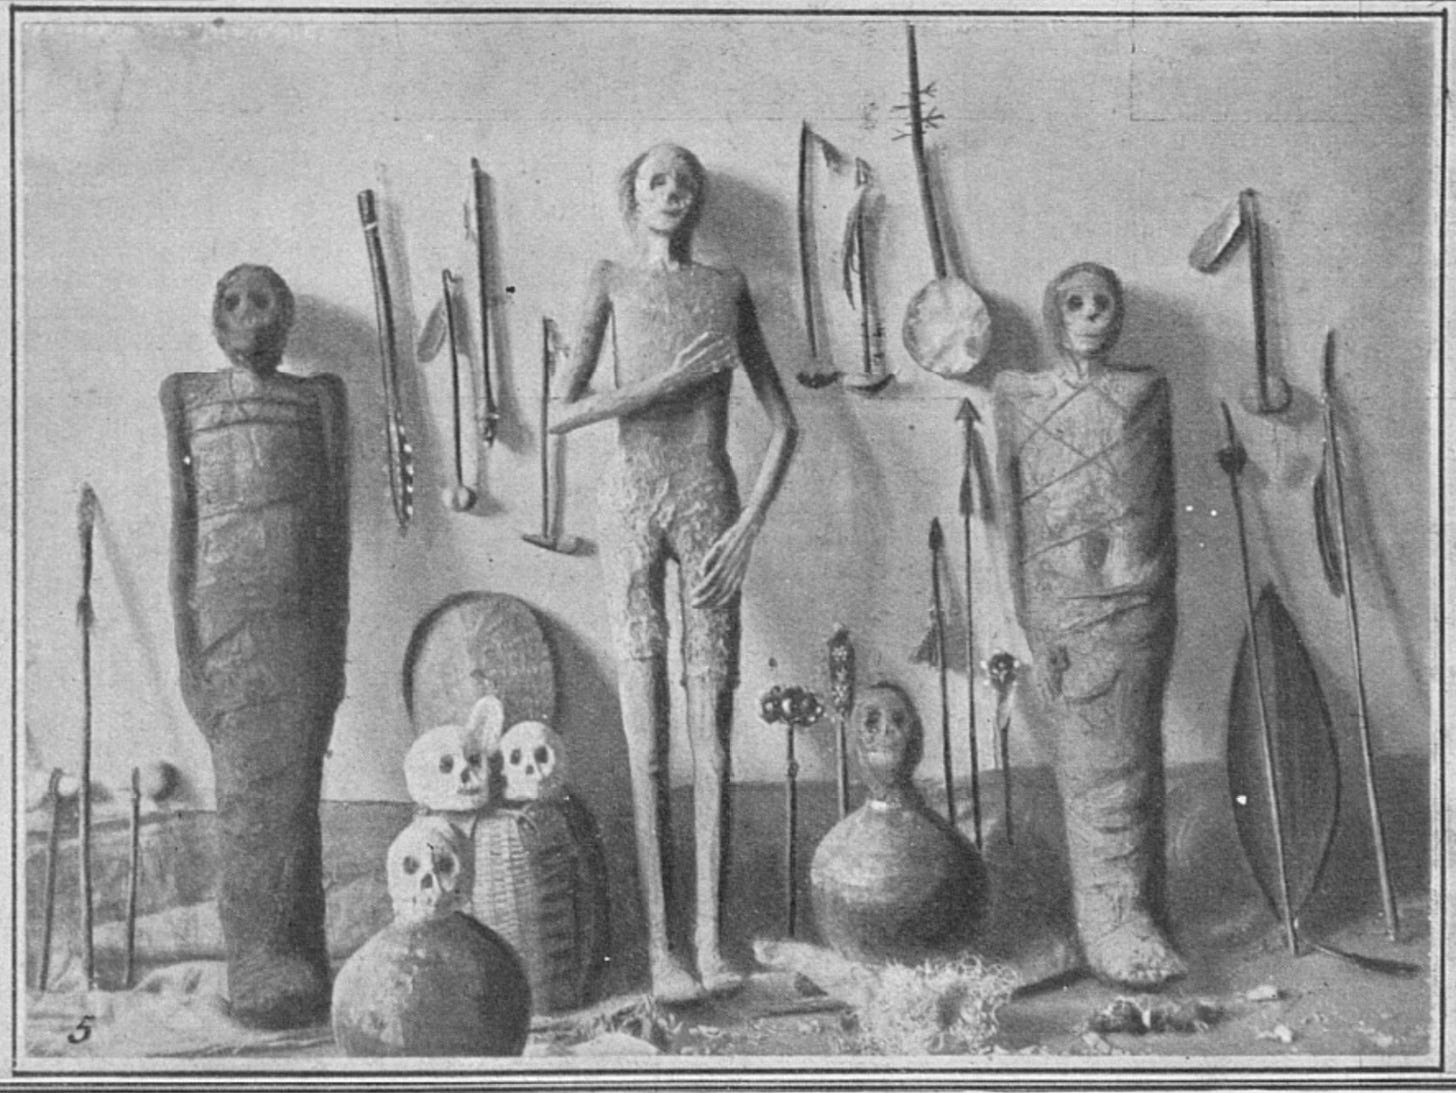 Numerous mummies, skulls, weapons and other antiquities are displayed upright against a wall.